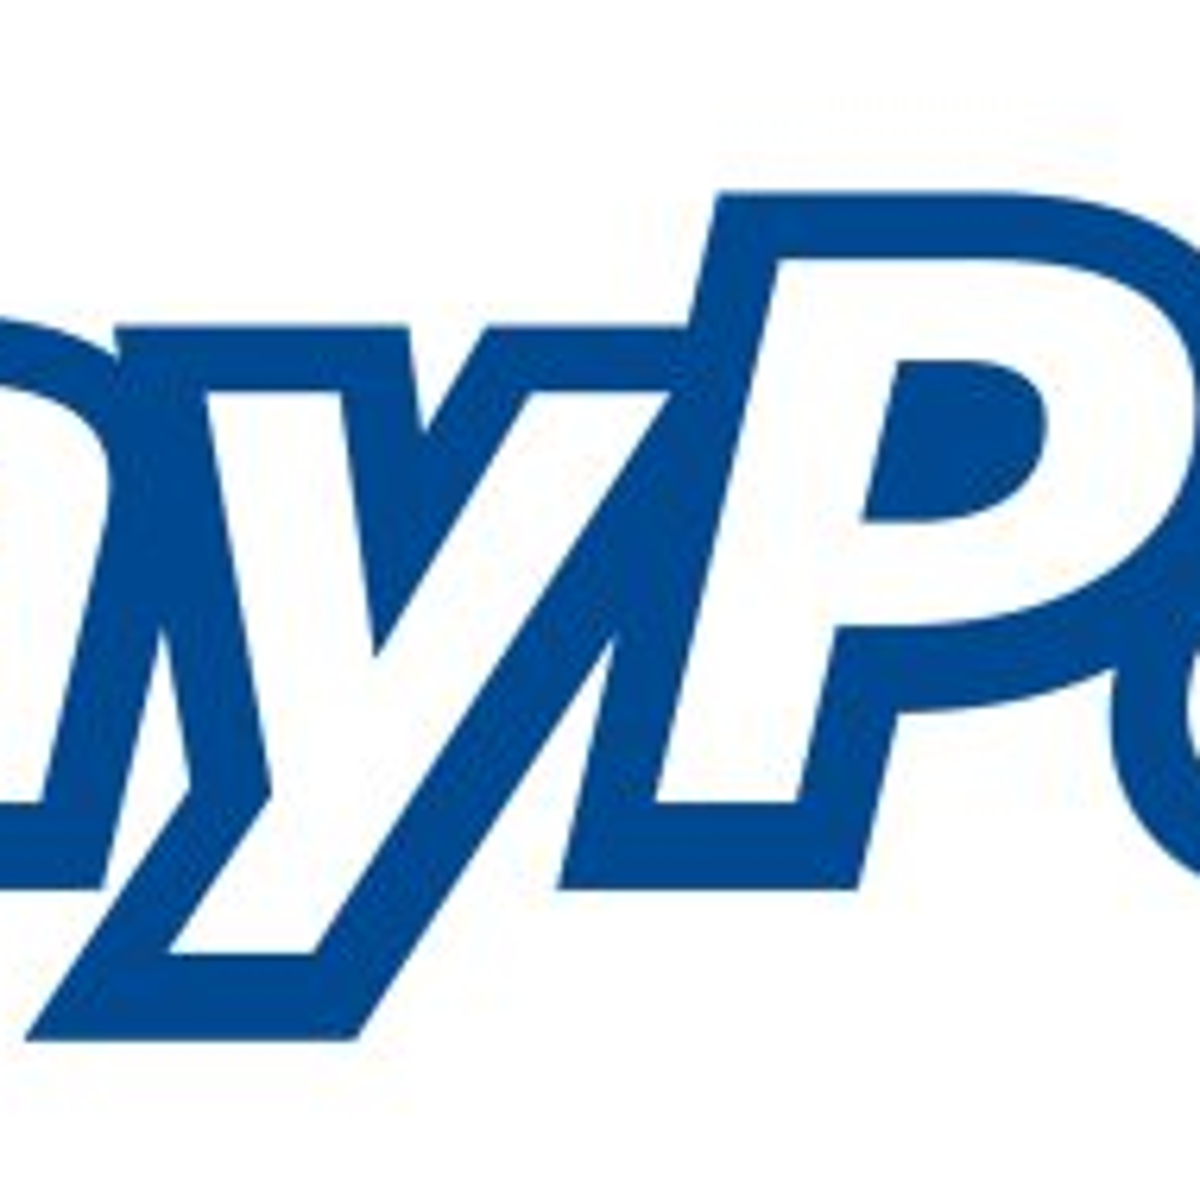 Human gift Drik PayPal can now be used to fund PSN wallets online in North America | VG247